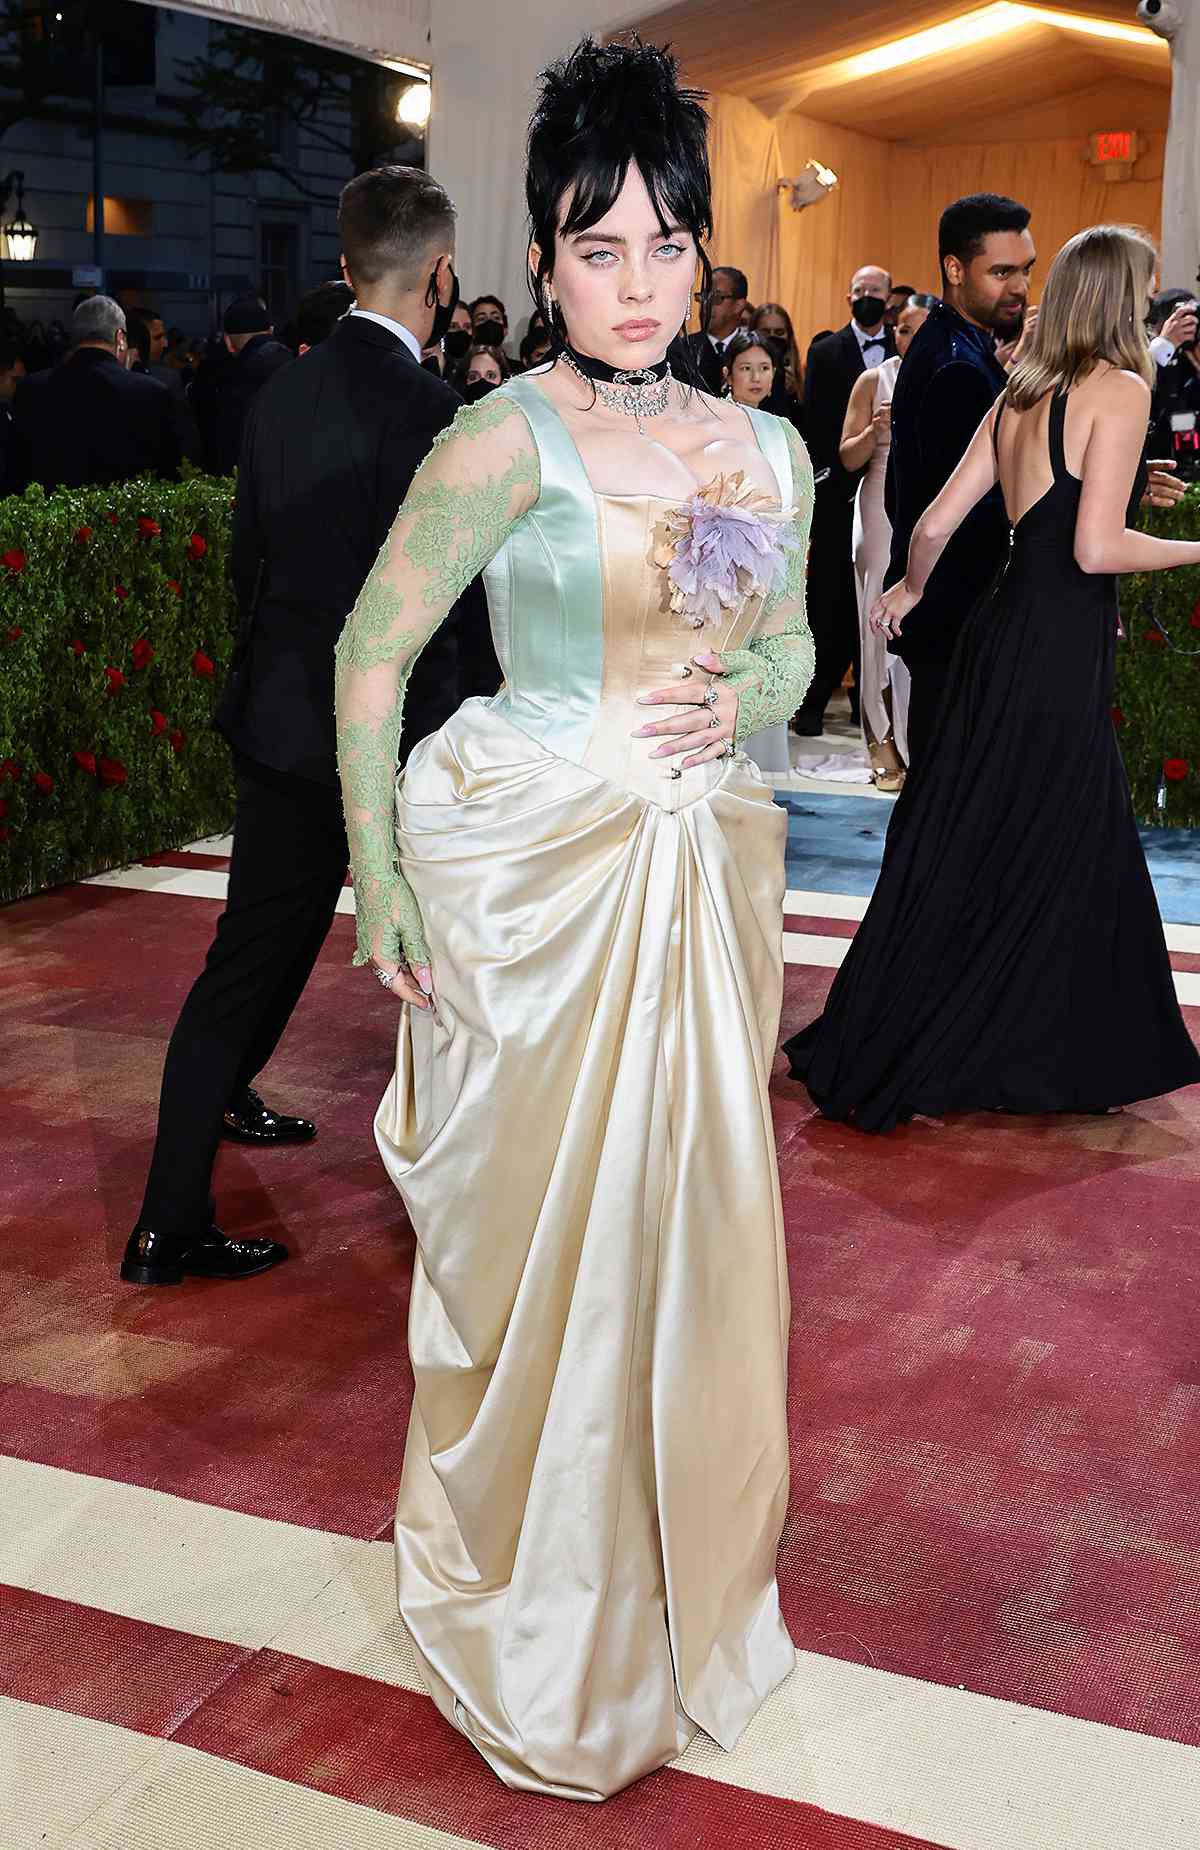 Billie Eilish Goes Goth Glam in Gucci at the 2022 Met Gala | PEOPLE.com